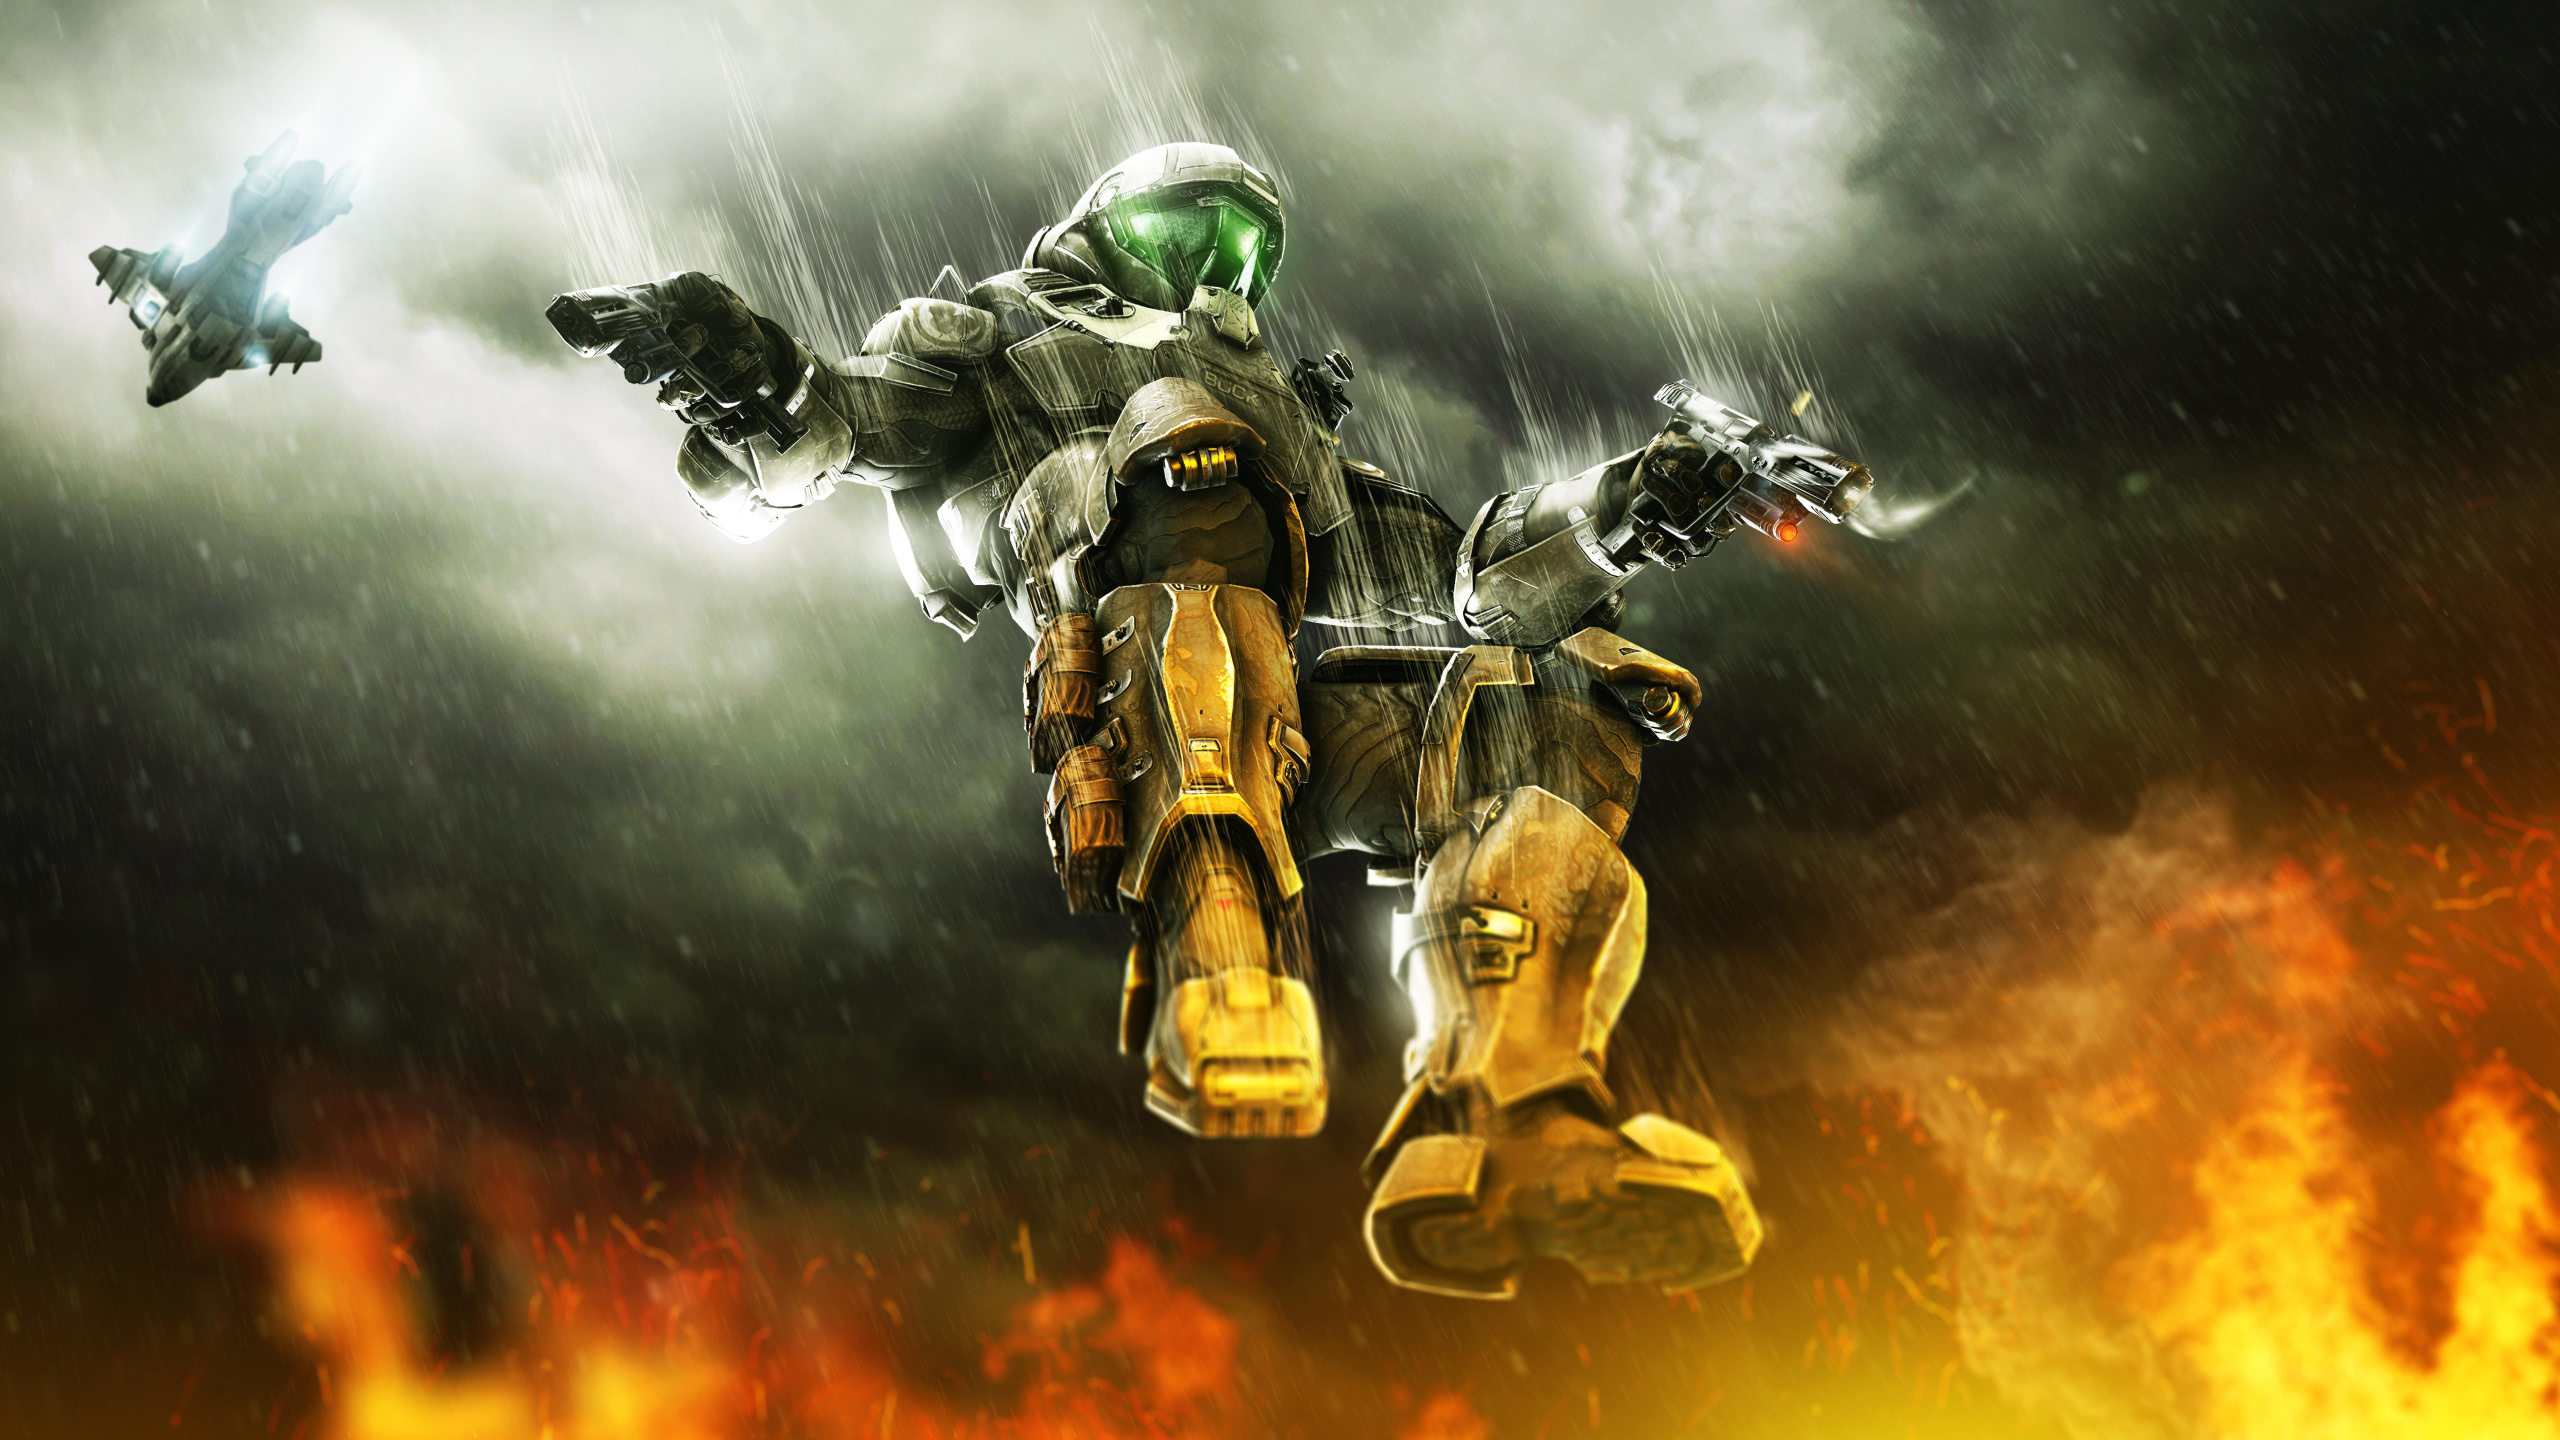 Halo 3, Master Chief, pc Game, Freestyle Motocross, Motocross. Wallpaper in 2560x1440 Resolution